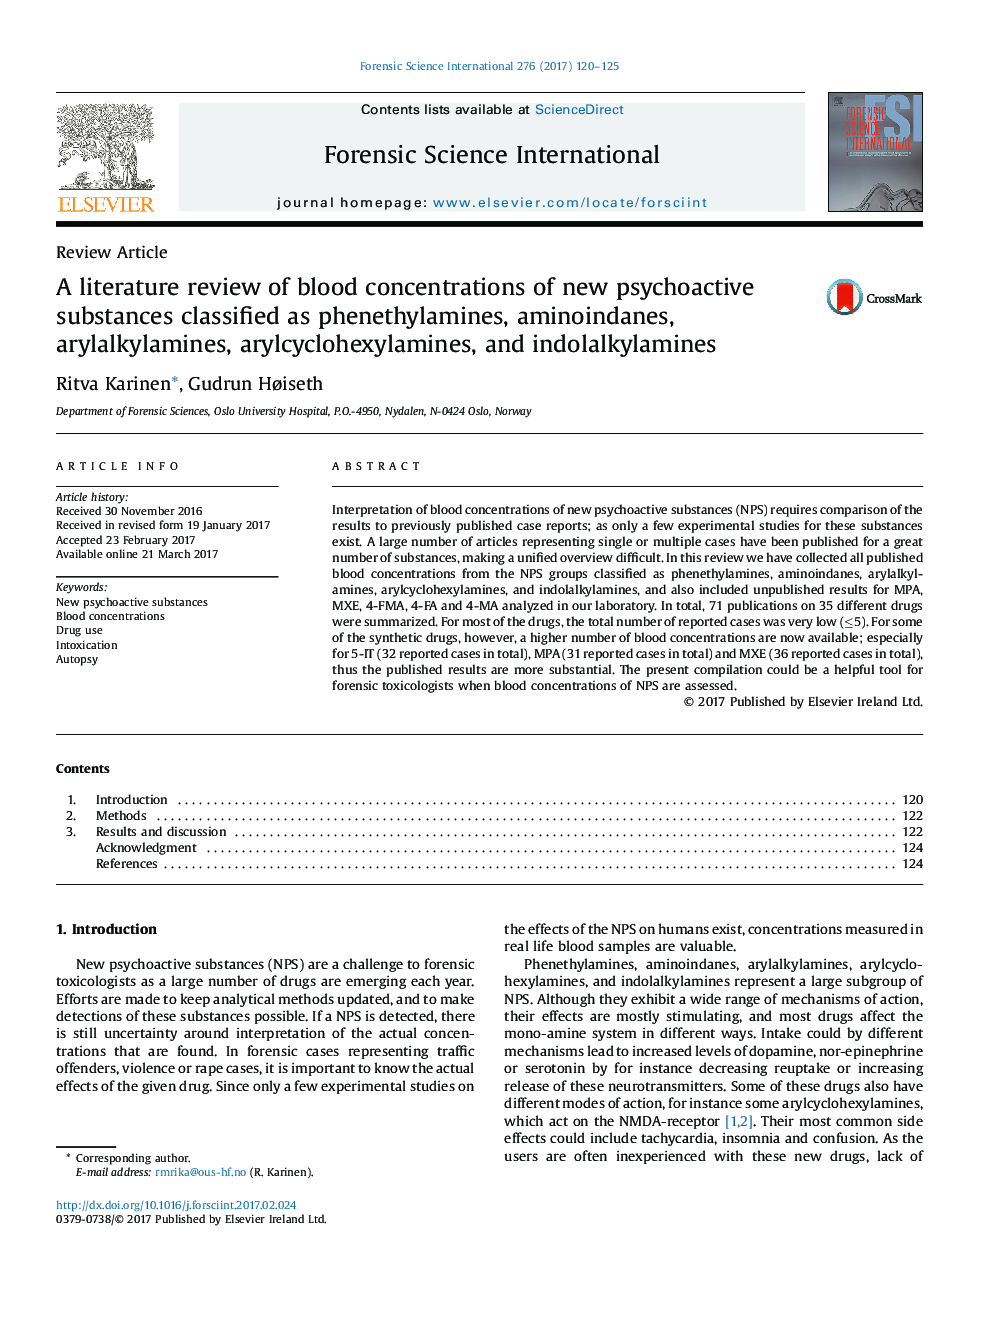 A literature review of blood concentrations of new psychoactive substances classified as phenethylamines, aminoindanes, arylalkylamines, arylcyclohexylamines, and indolalkylamines